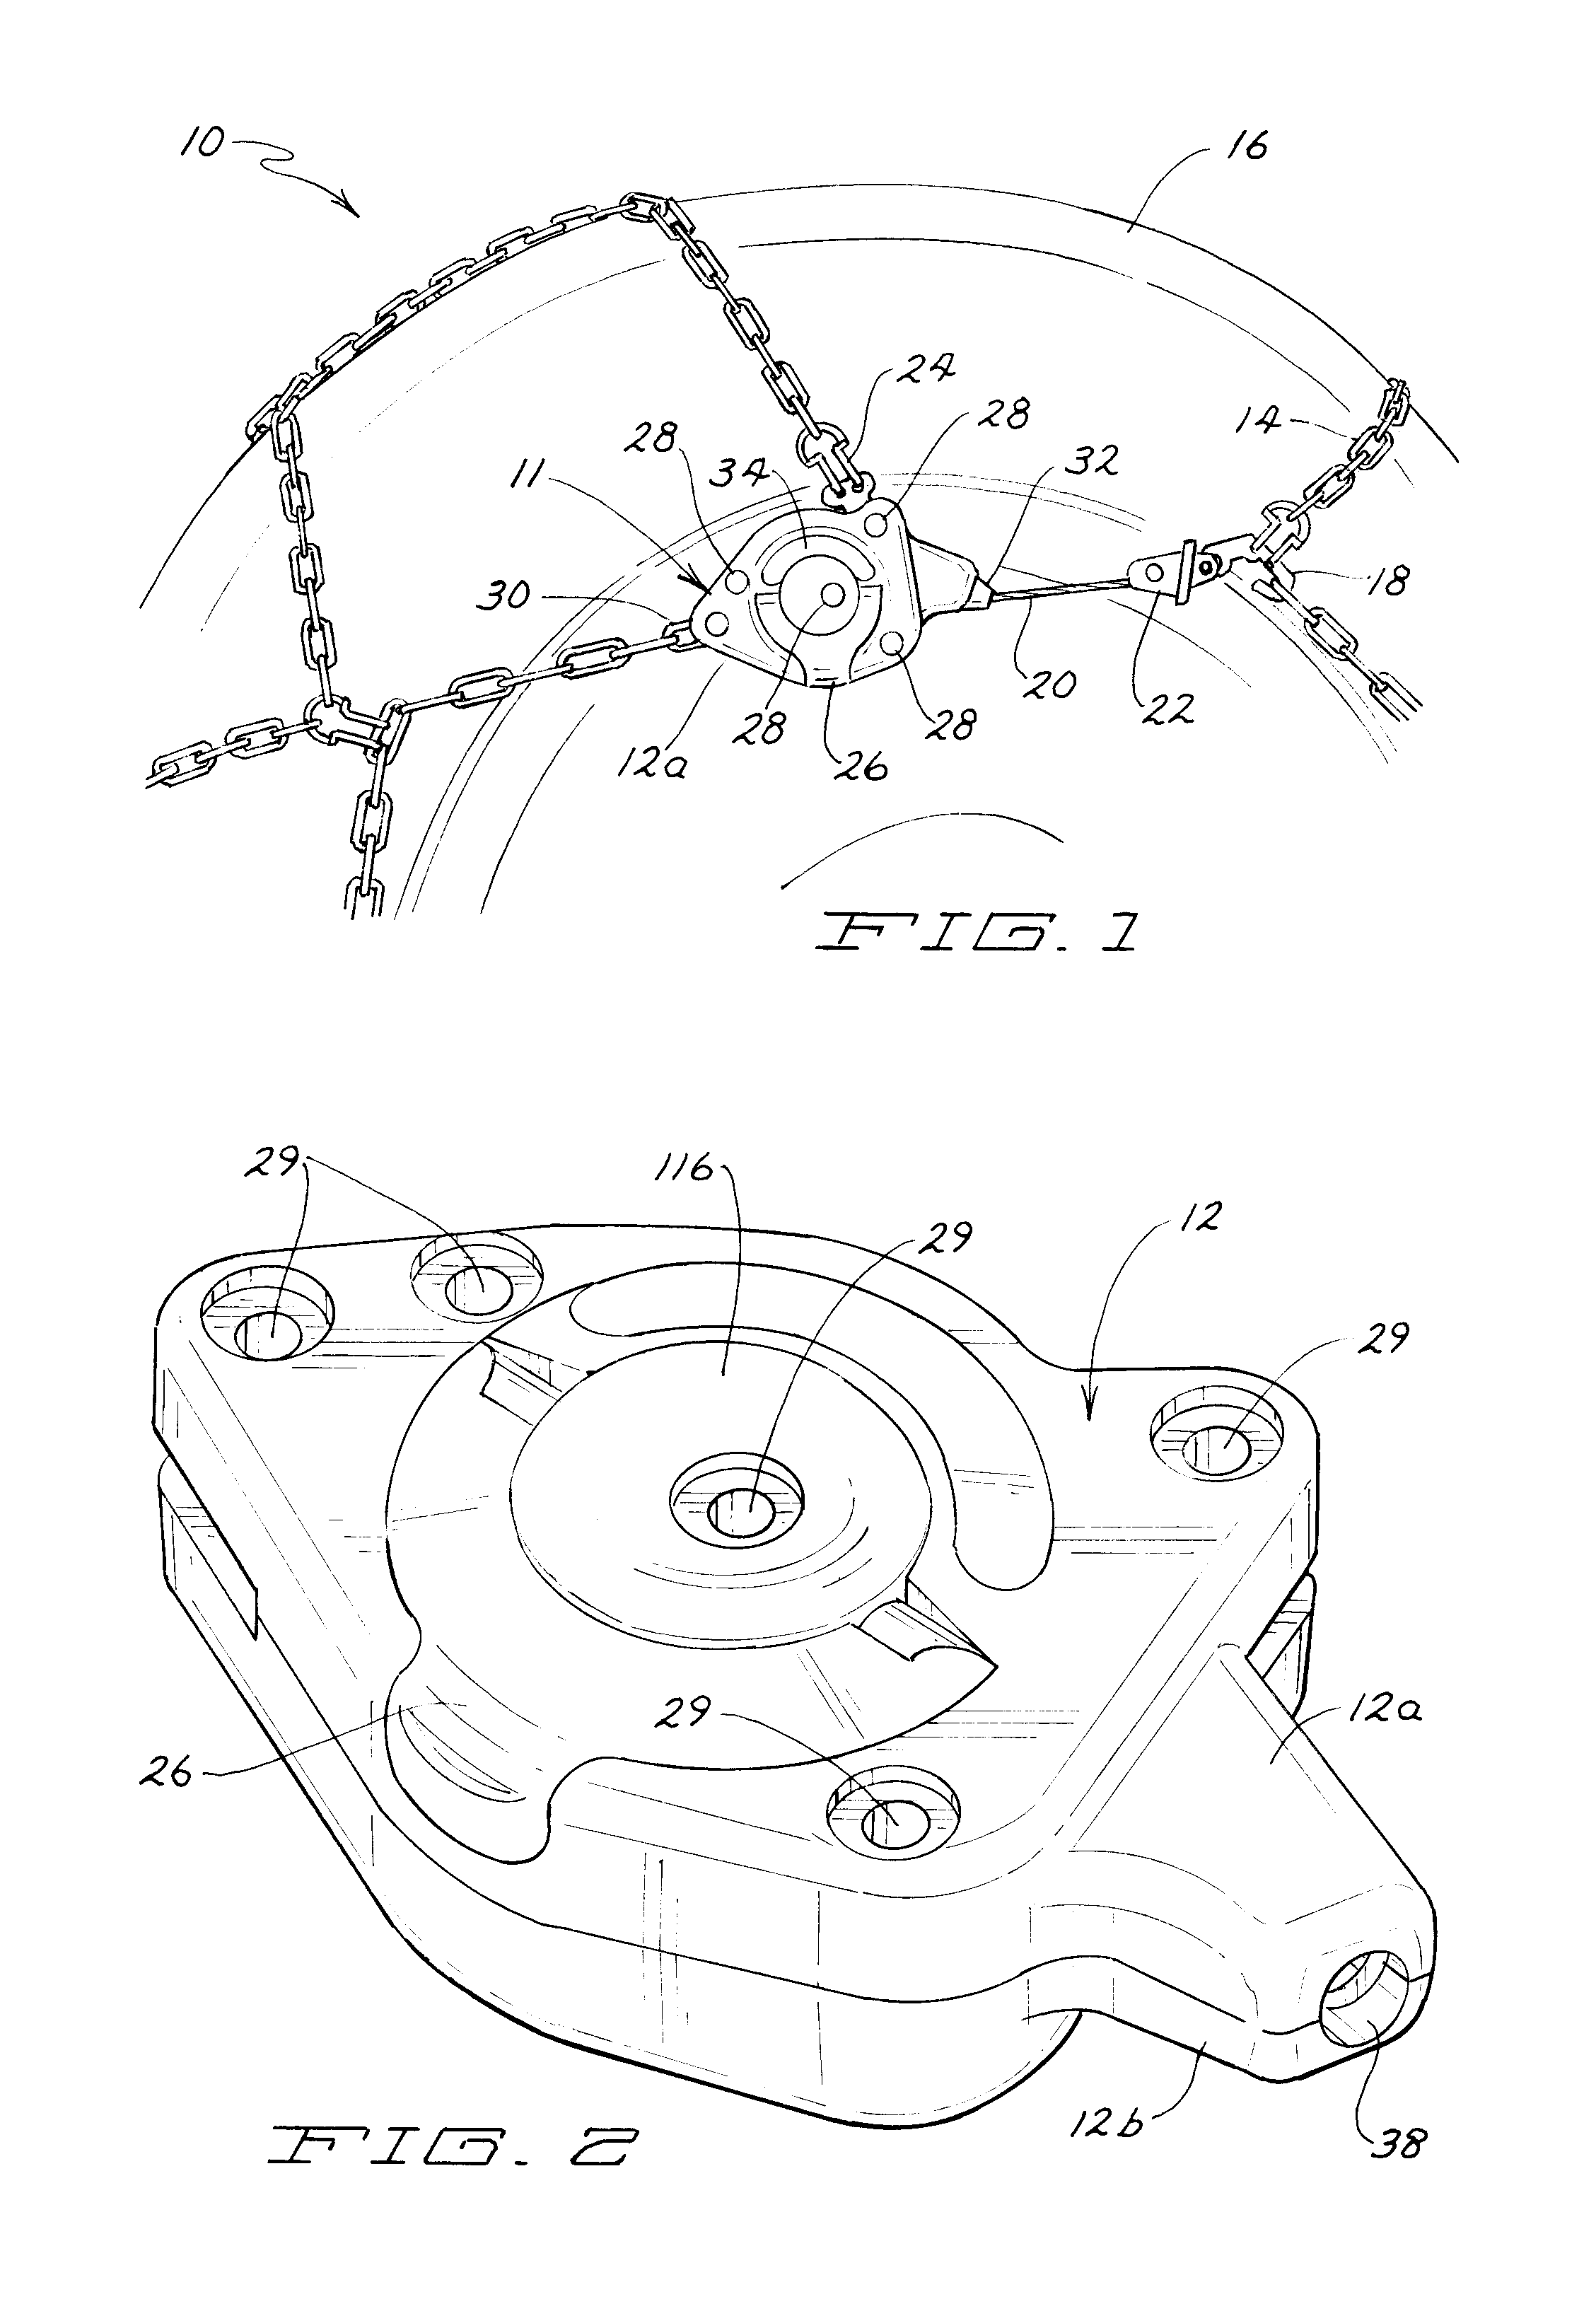 Self-tightening traction assembly having tensioning device